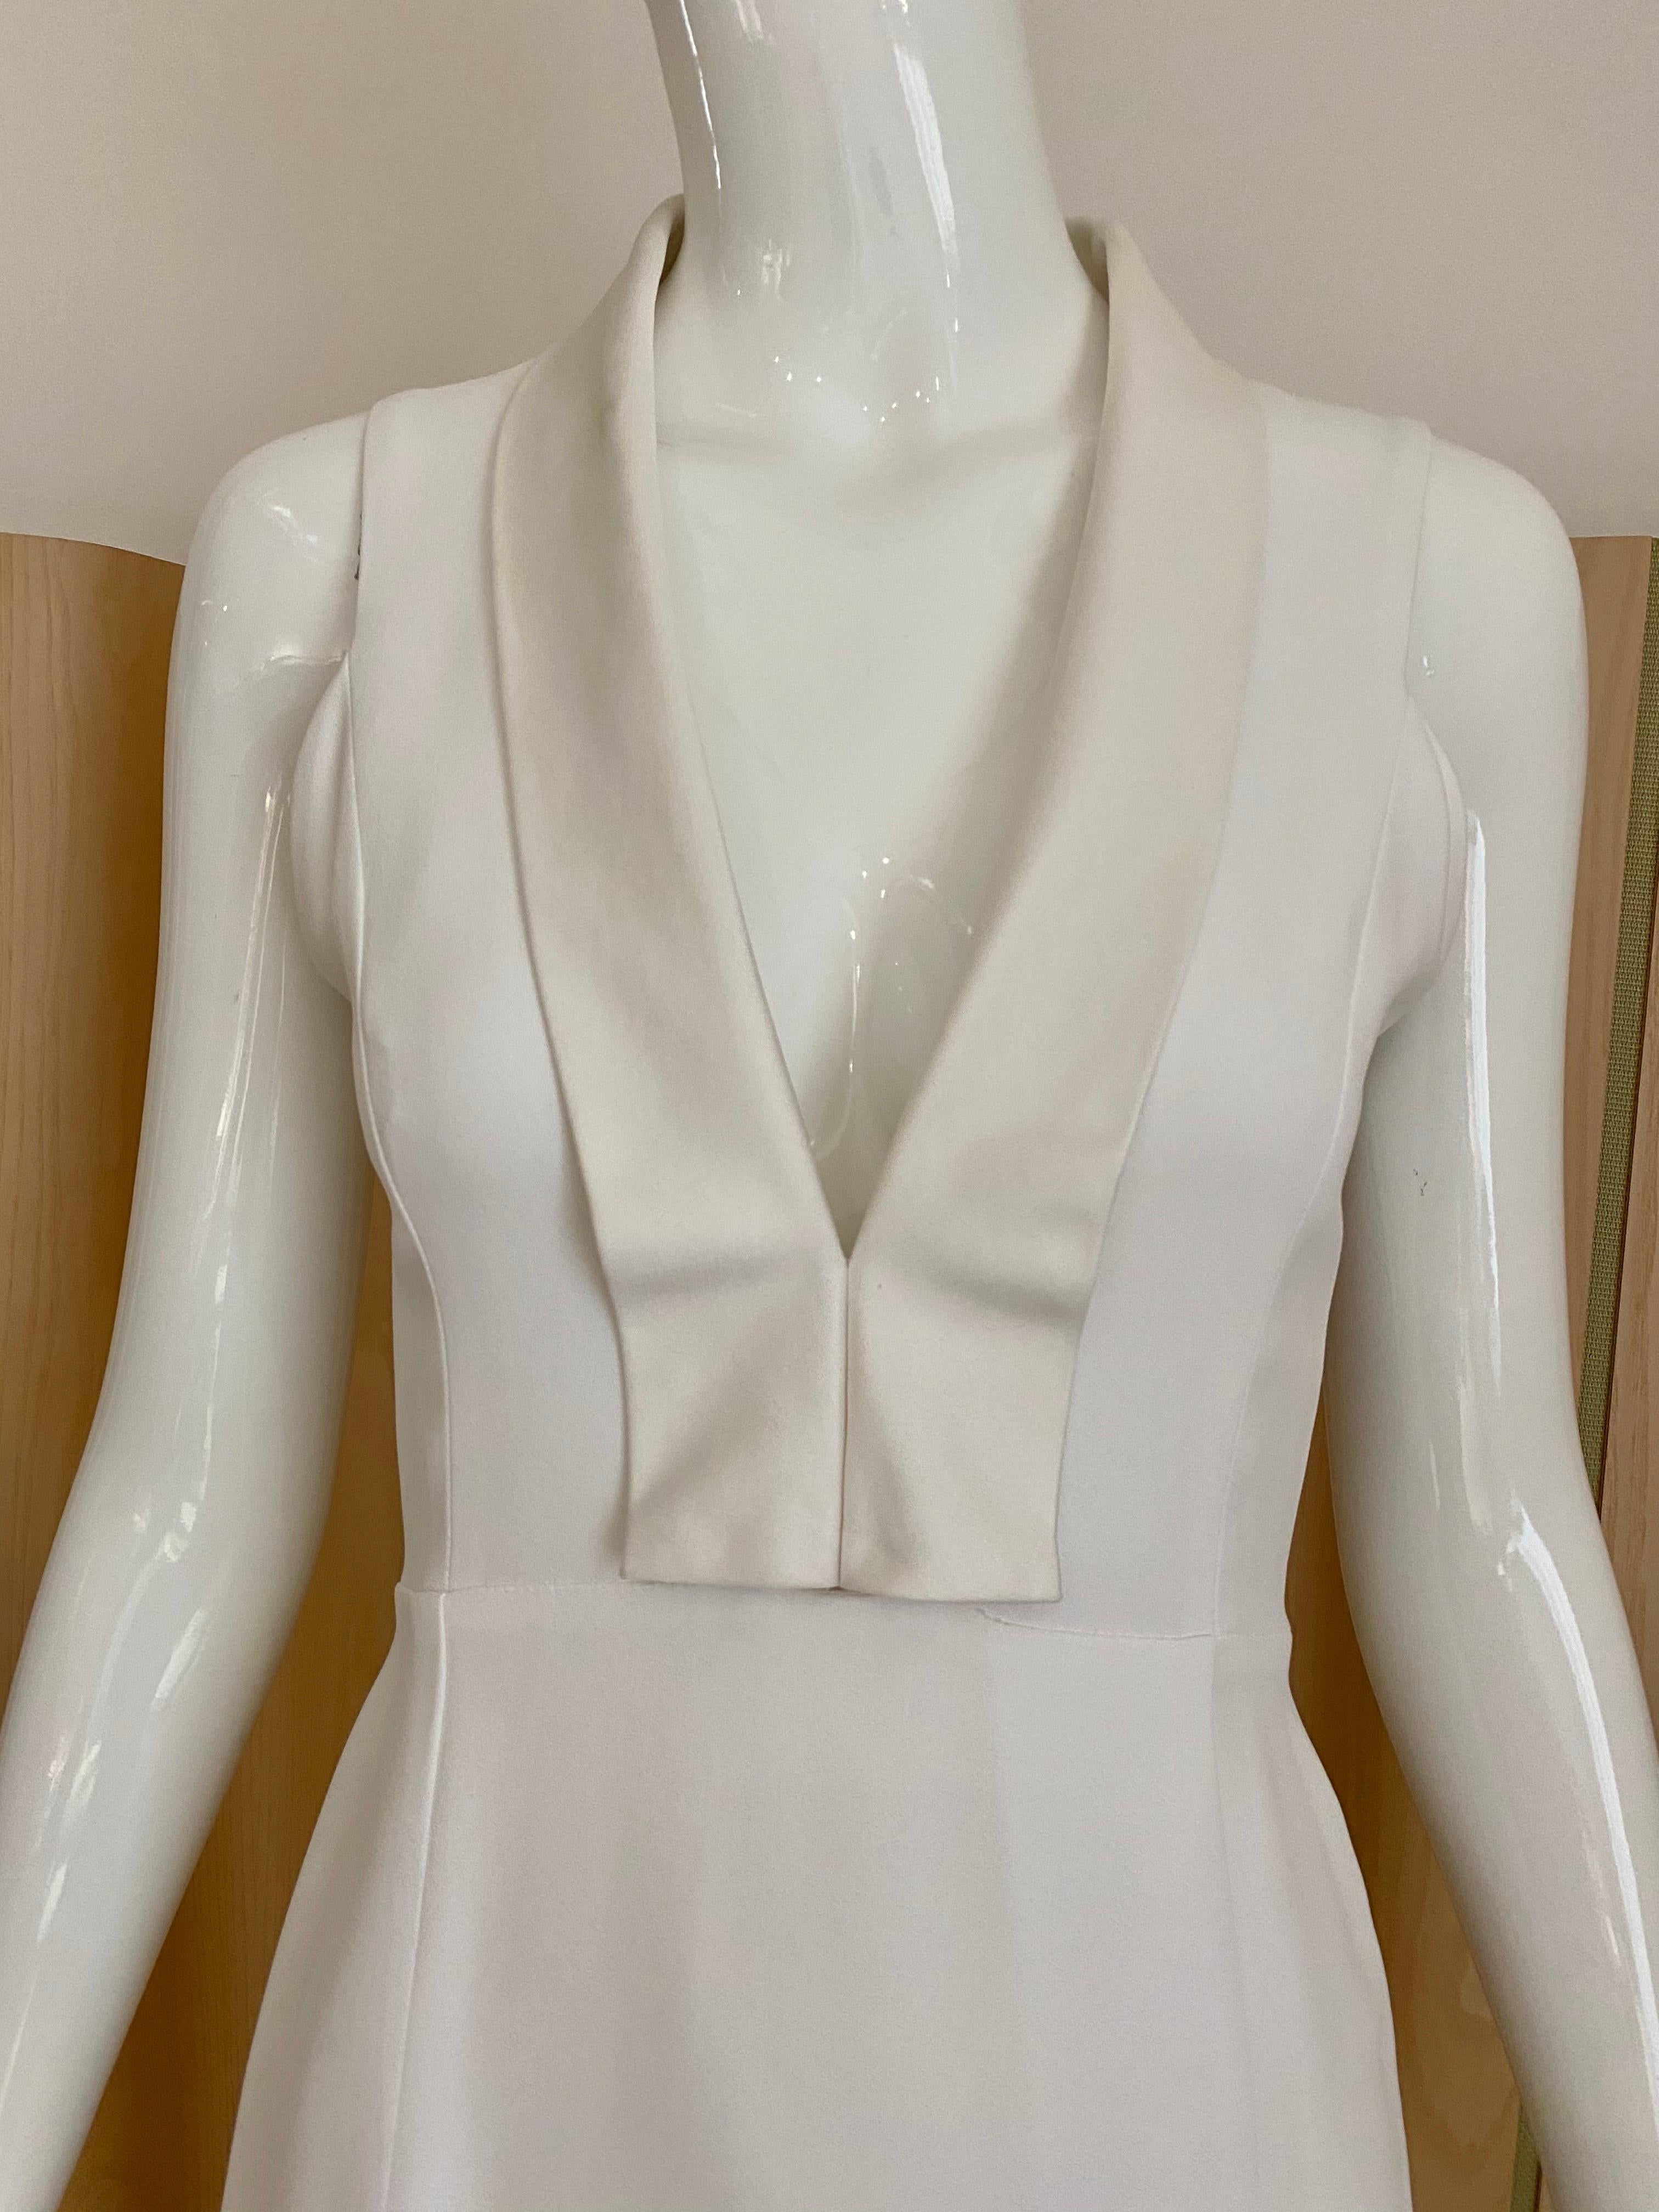 90s Gianfranco Ferre White Silk sleeveless gown with v neck satin lapel.
Size: 40italy, fit size 6 US
Perfect for wedding or rehearsal dinner. 